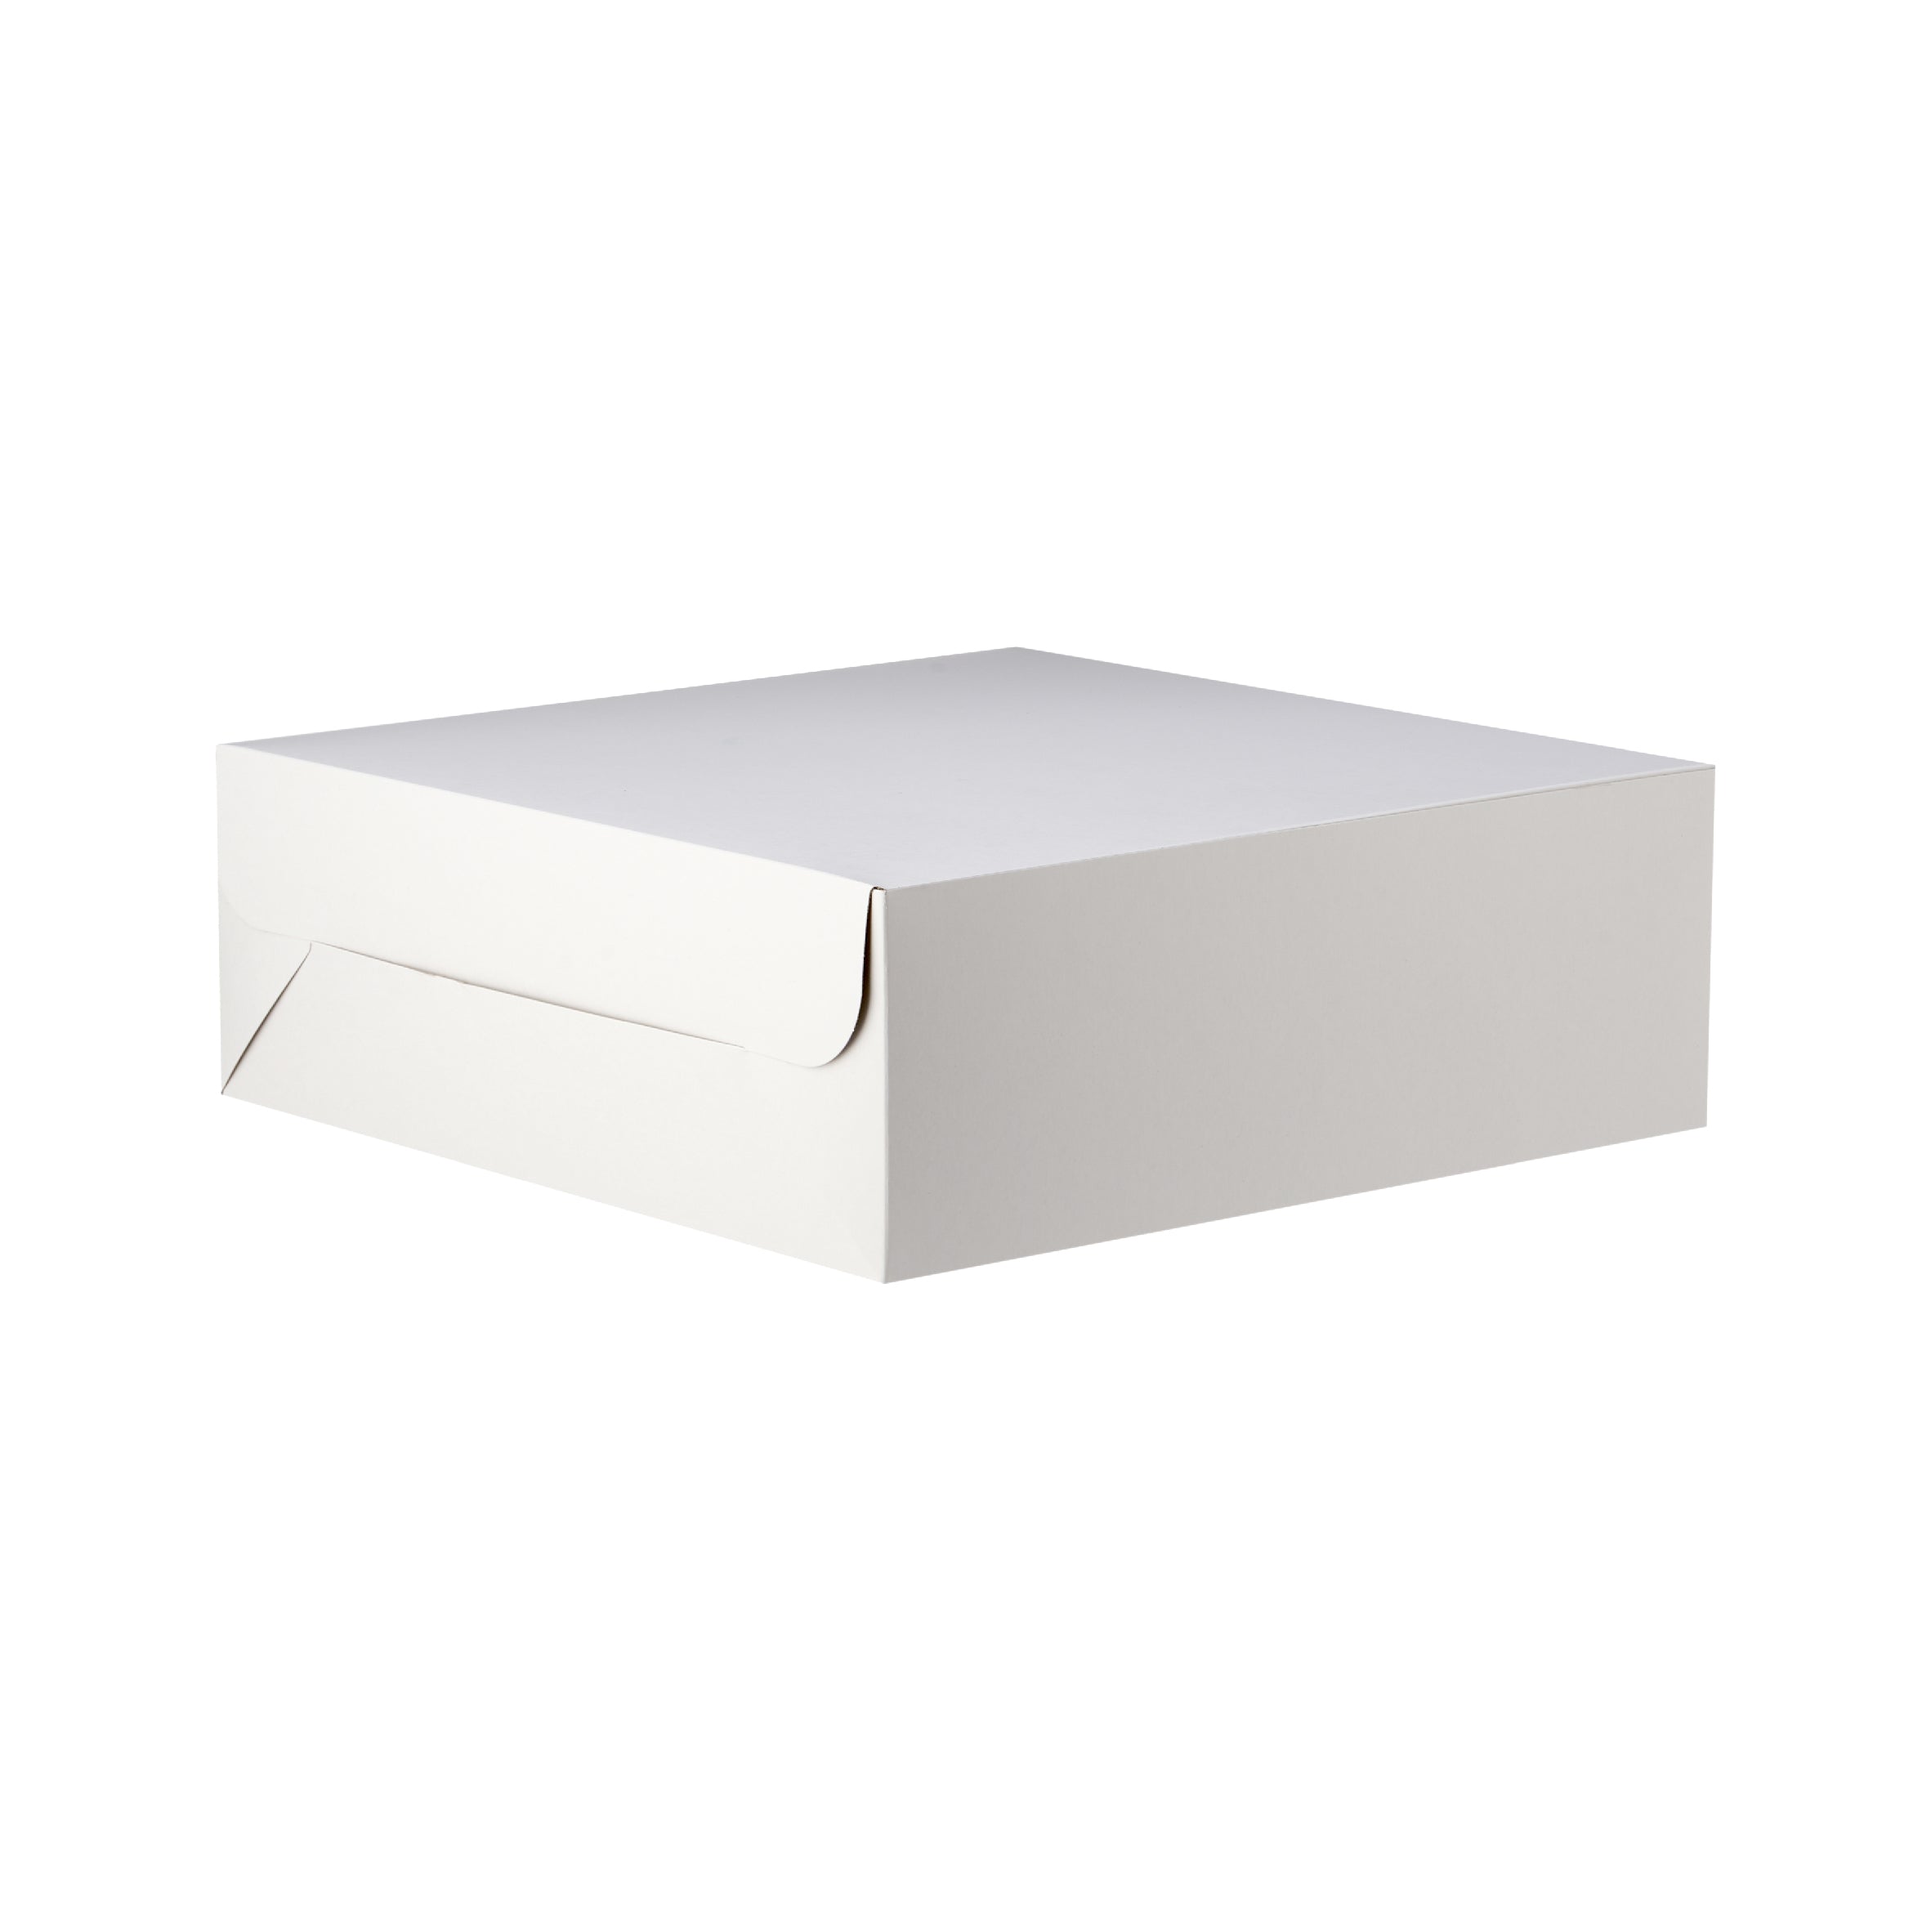 6 inch Pastry Box - Cake Box - Brownie Box - White Colour - 16cm x 16cm x  9cm - 10pcs/pack, Food & Drinks, Homemade Bakes on Carousell